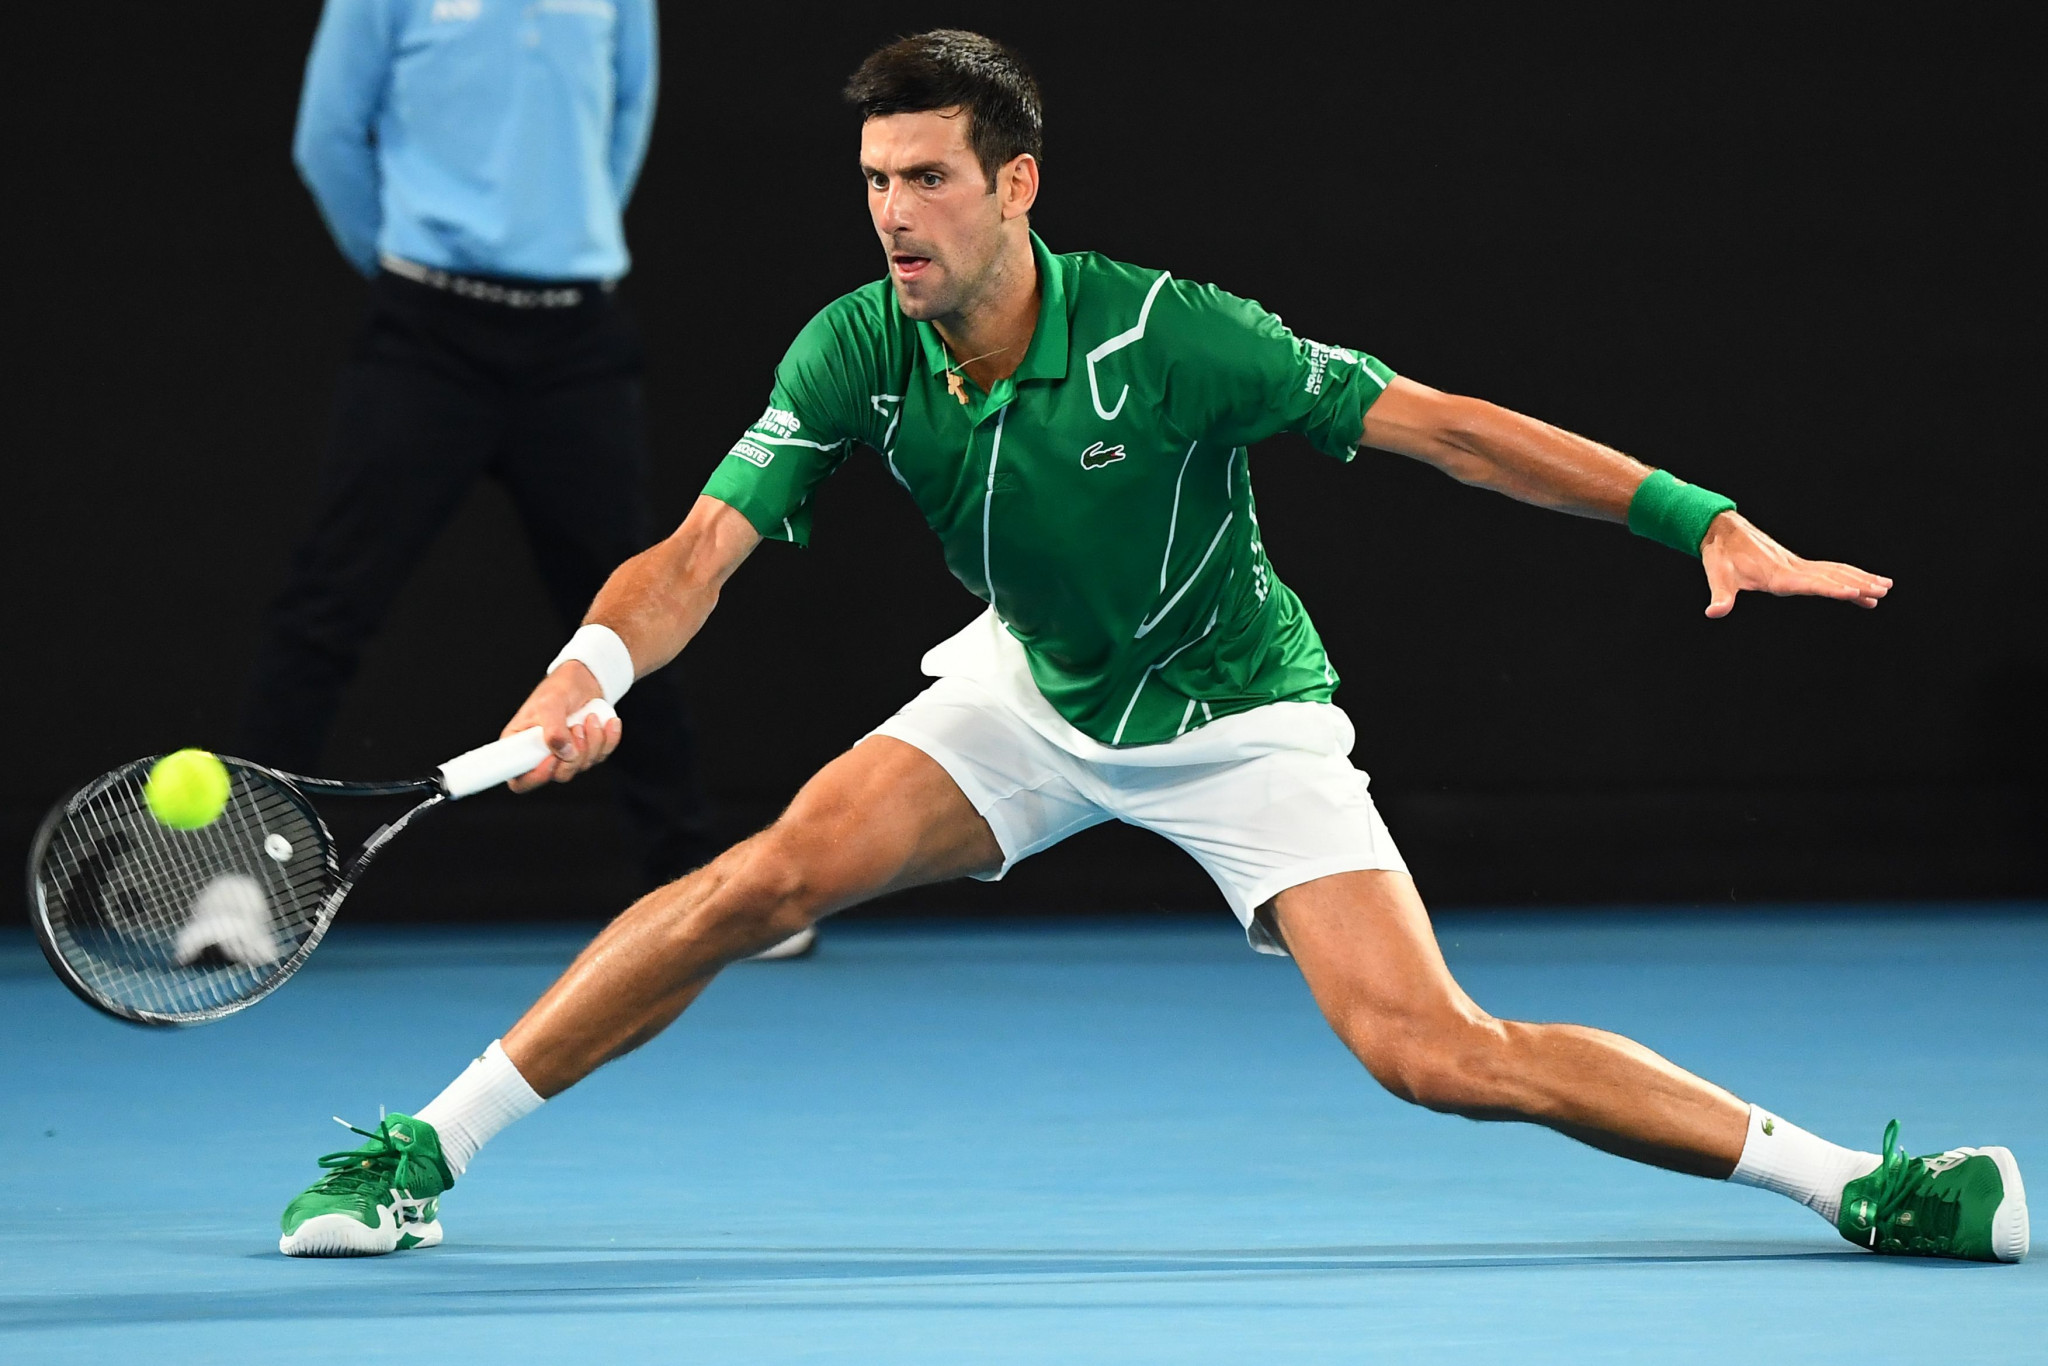 Serbia's Novak Djokovic was the winner of the men's competition at the 2019 Australian Open ©Getty Images